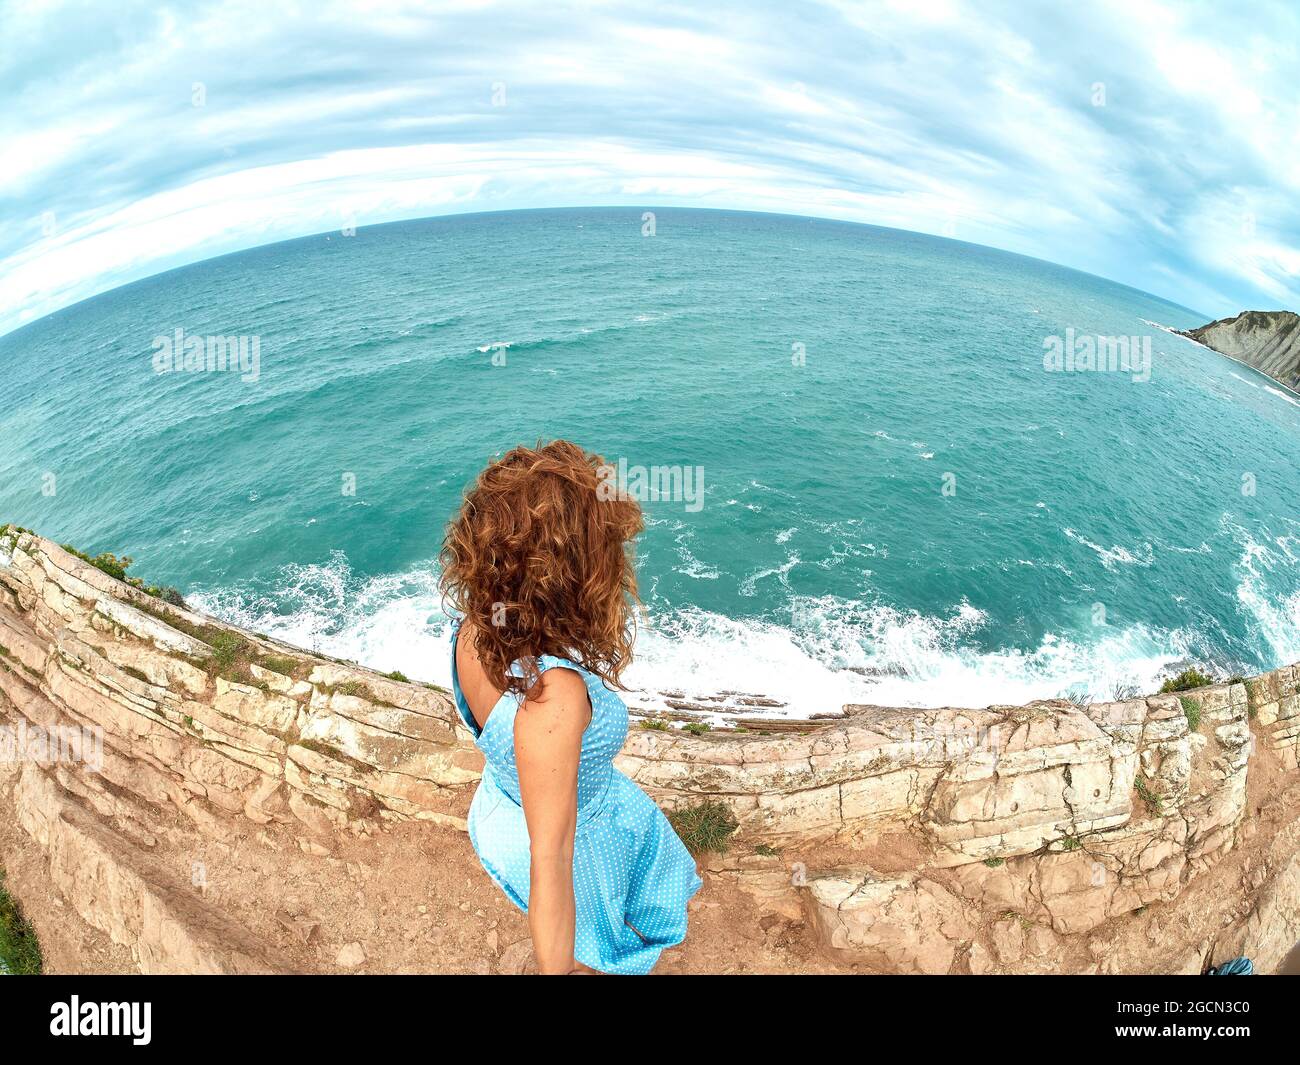 A slim girl in a dress with her back to the sea. A woman is on the beach. Rest in the sea. Fisheim lens Stock Photo